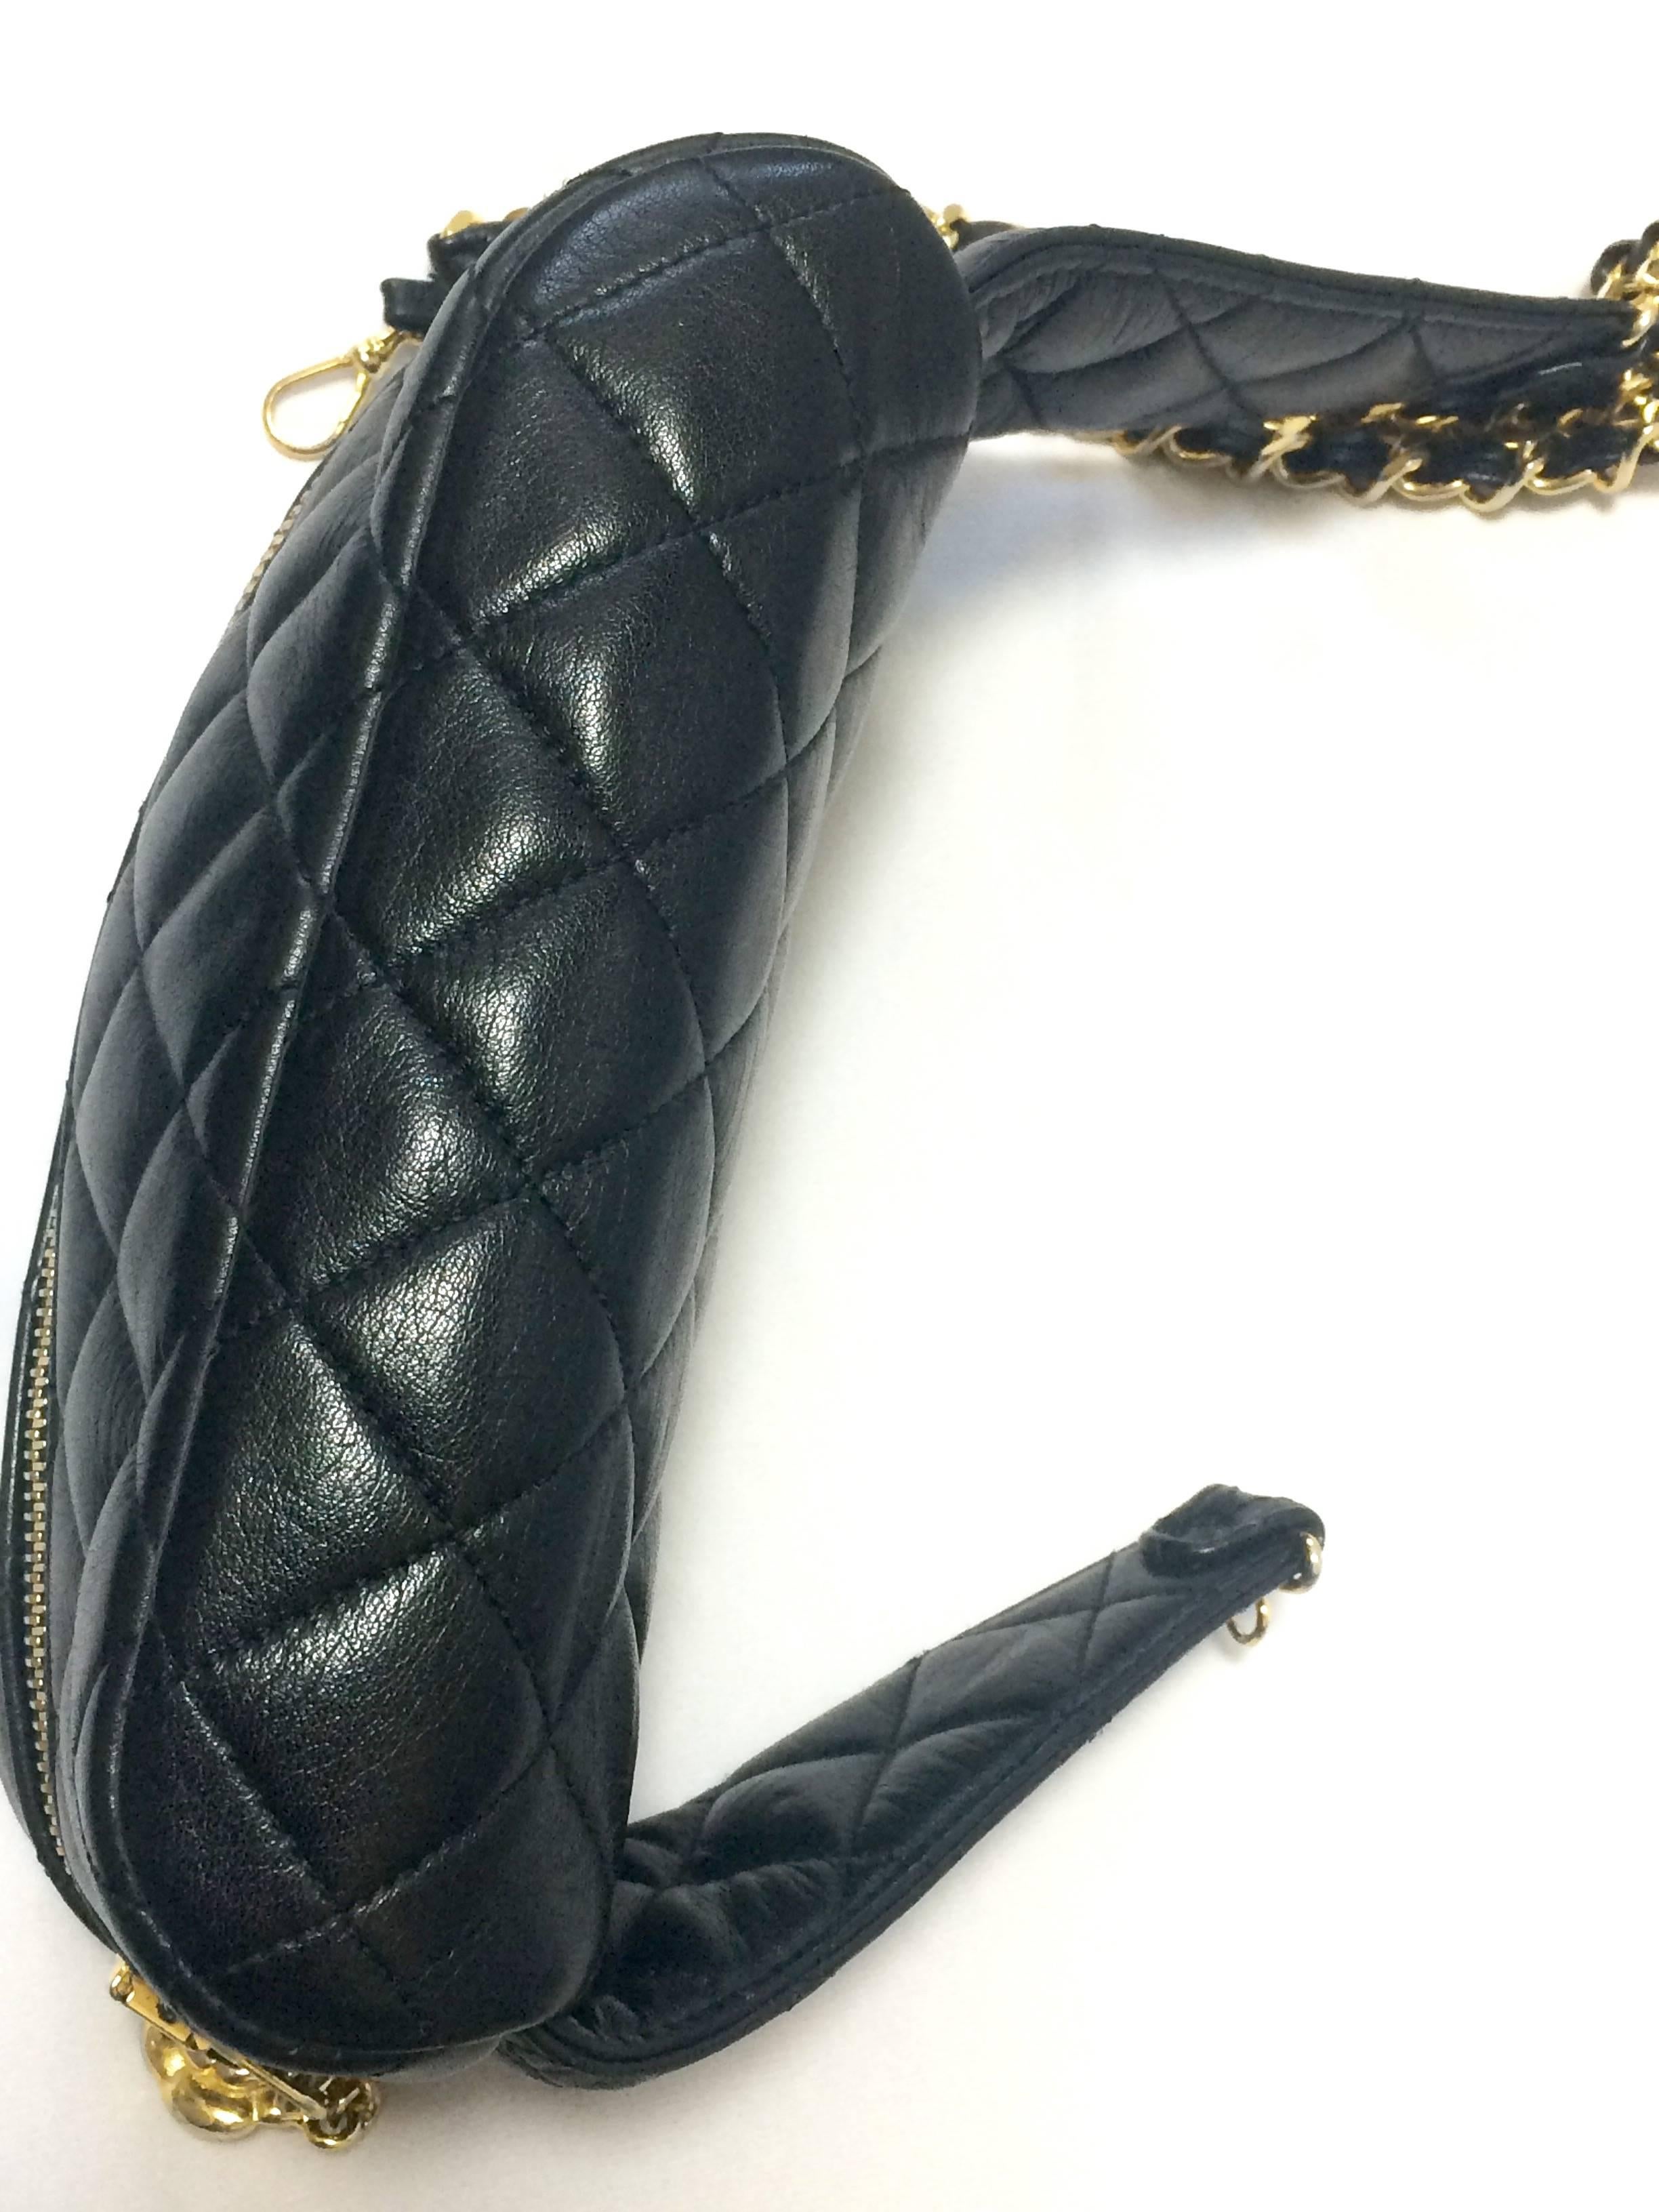 Vintage CHANEL black waist bag, fanny pack with triple golden chain leather belt In Good Condition For Sale In Kashiwa, Chiba